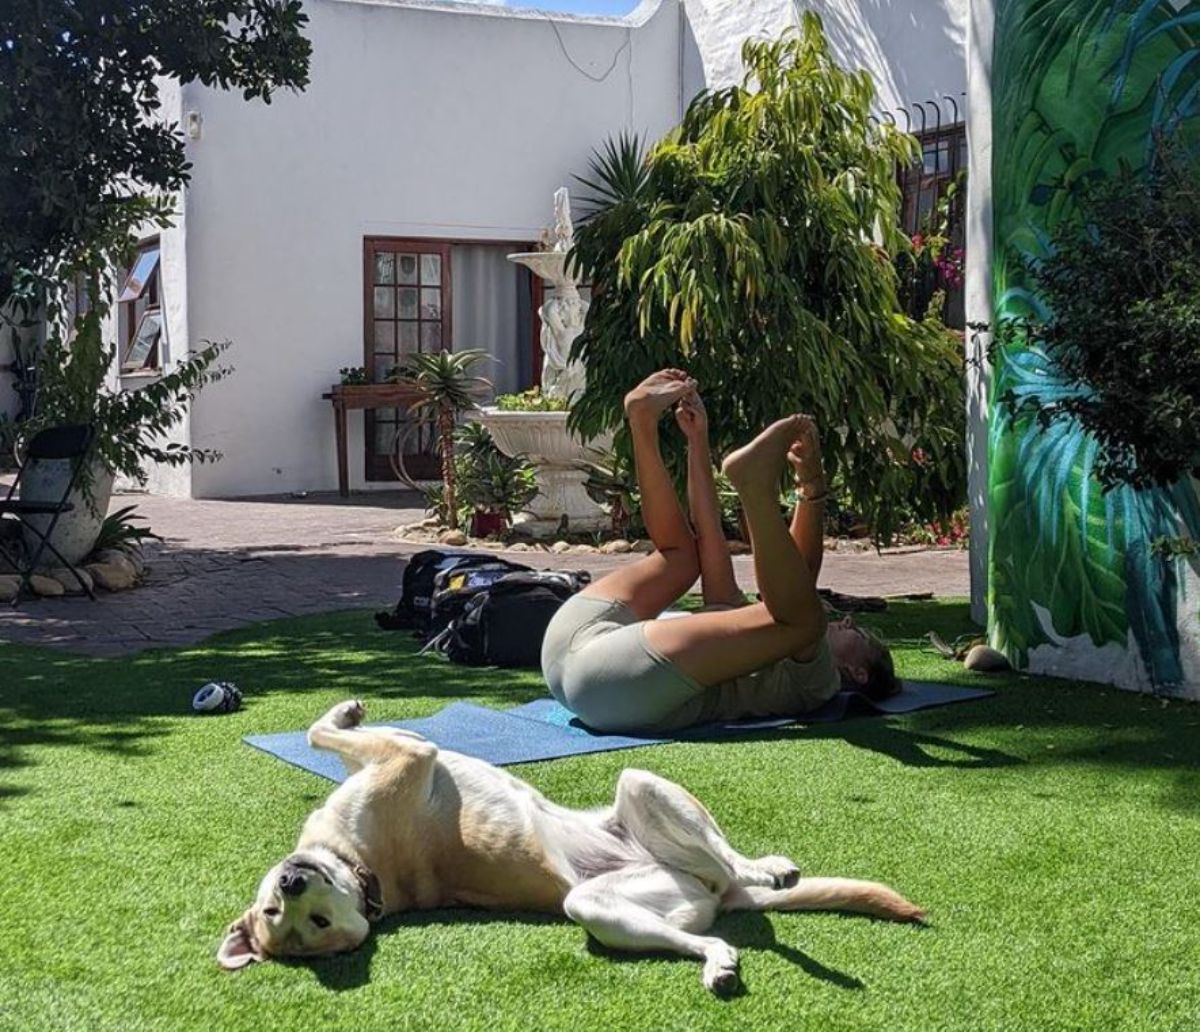 brown and white dog laying belly up on grass next to a woman doing yoga